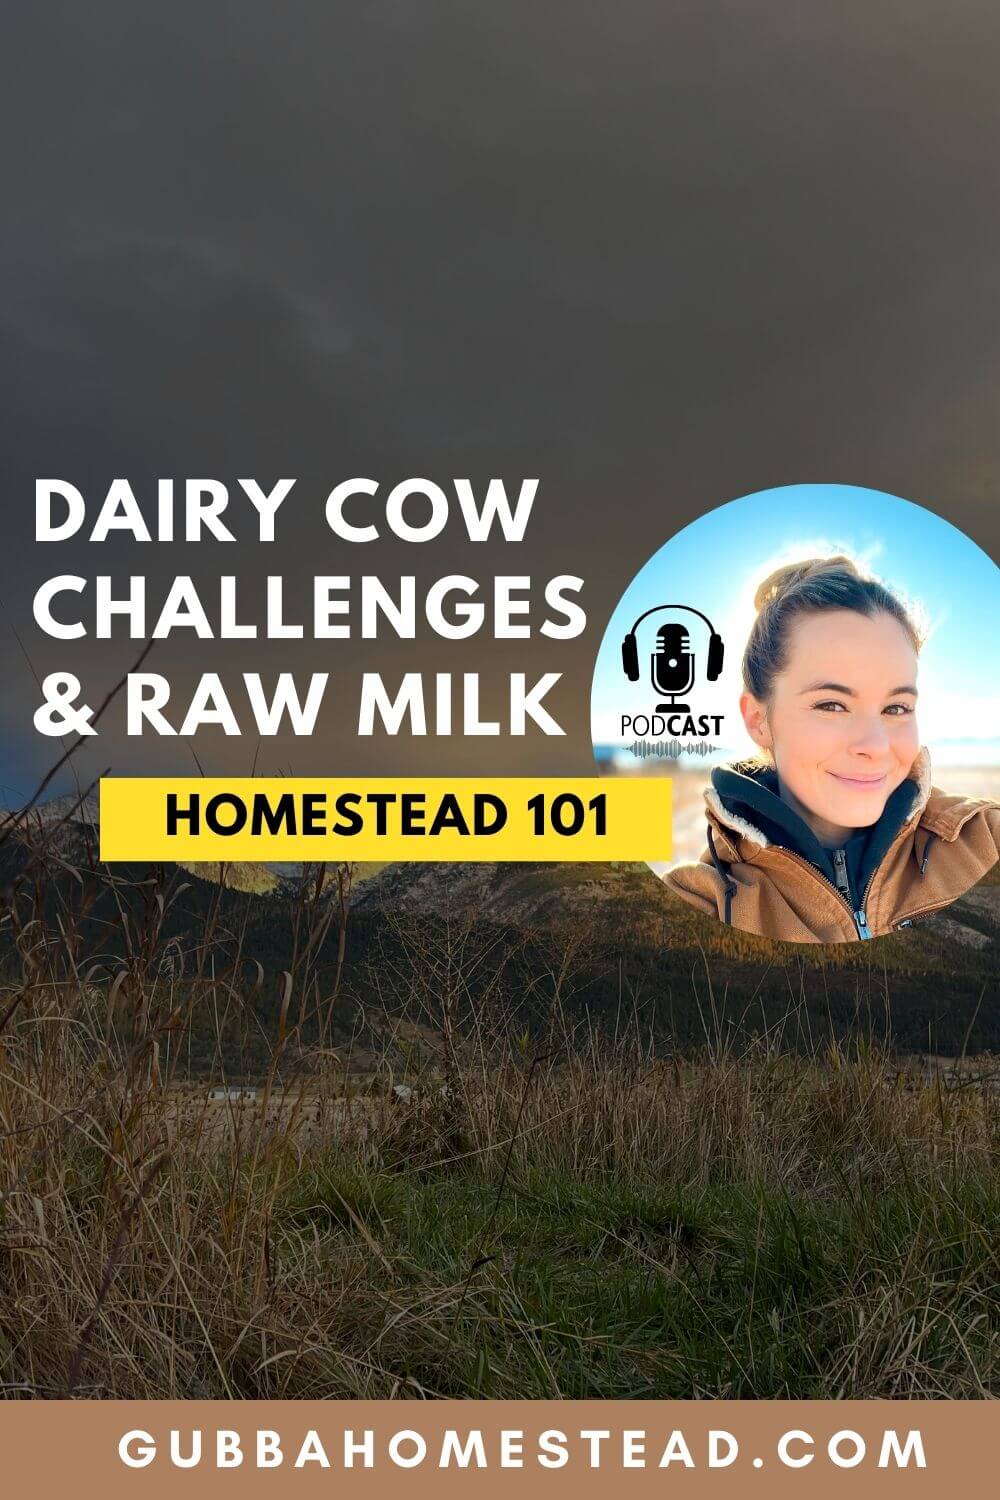 Homestead 101: Dairy Cow, Challenges, and Raw Milk